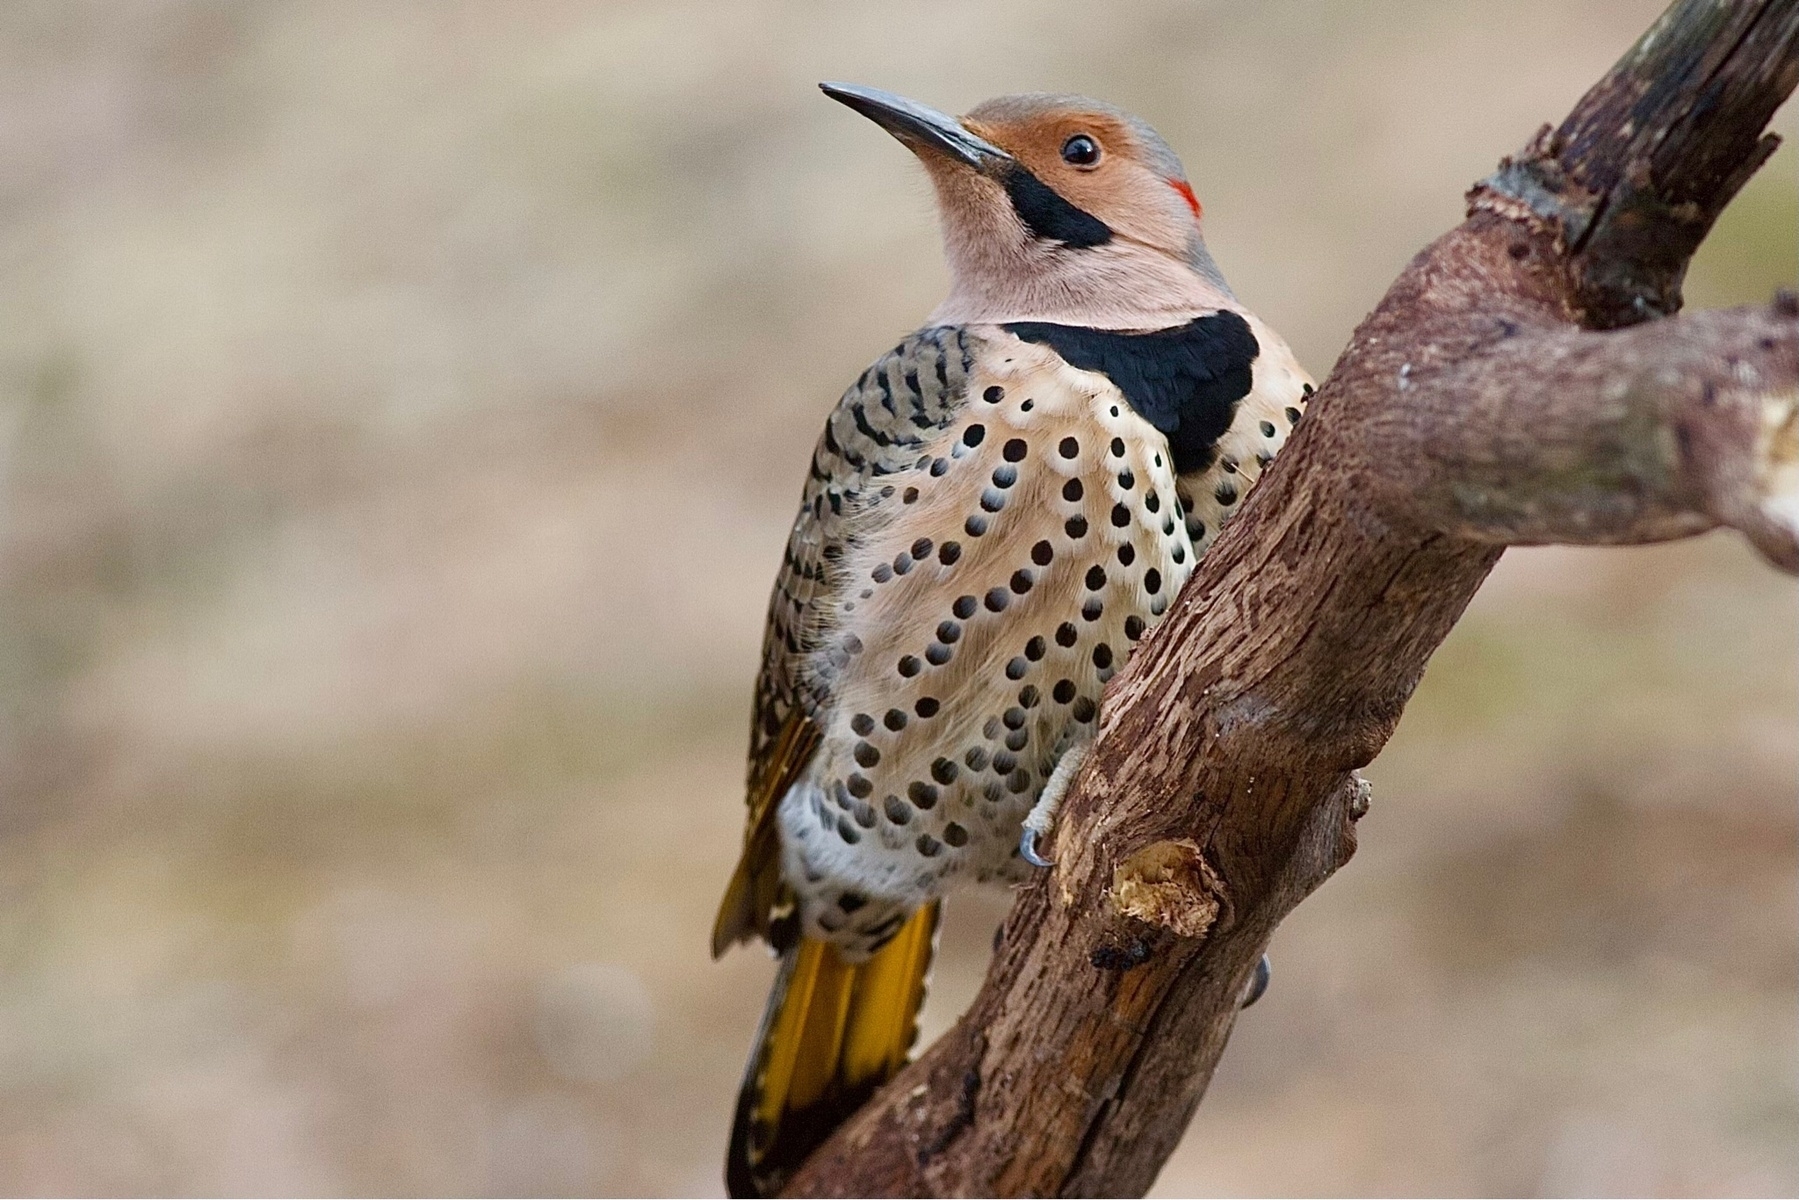 a large woodpecker, perched on a branch against a blurred background. The woodpecker is a tannish brown color, overall with a black triangle on its breast. Its chest is covered with black spots, and its tail is yellow on the underside. On the side of its beak, dropping down below its eye, is a black triangular shape.